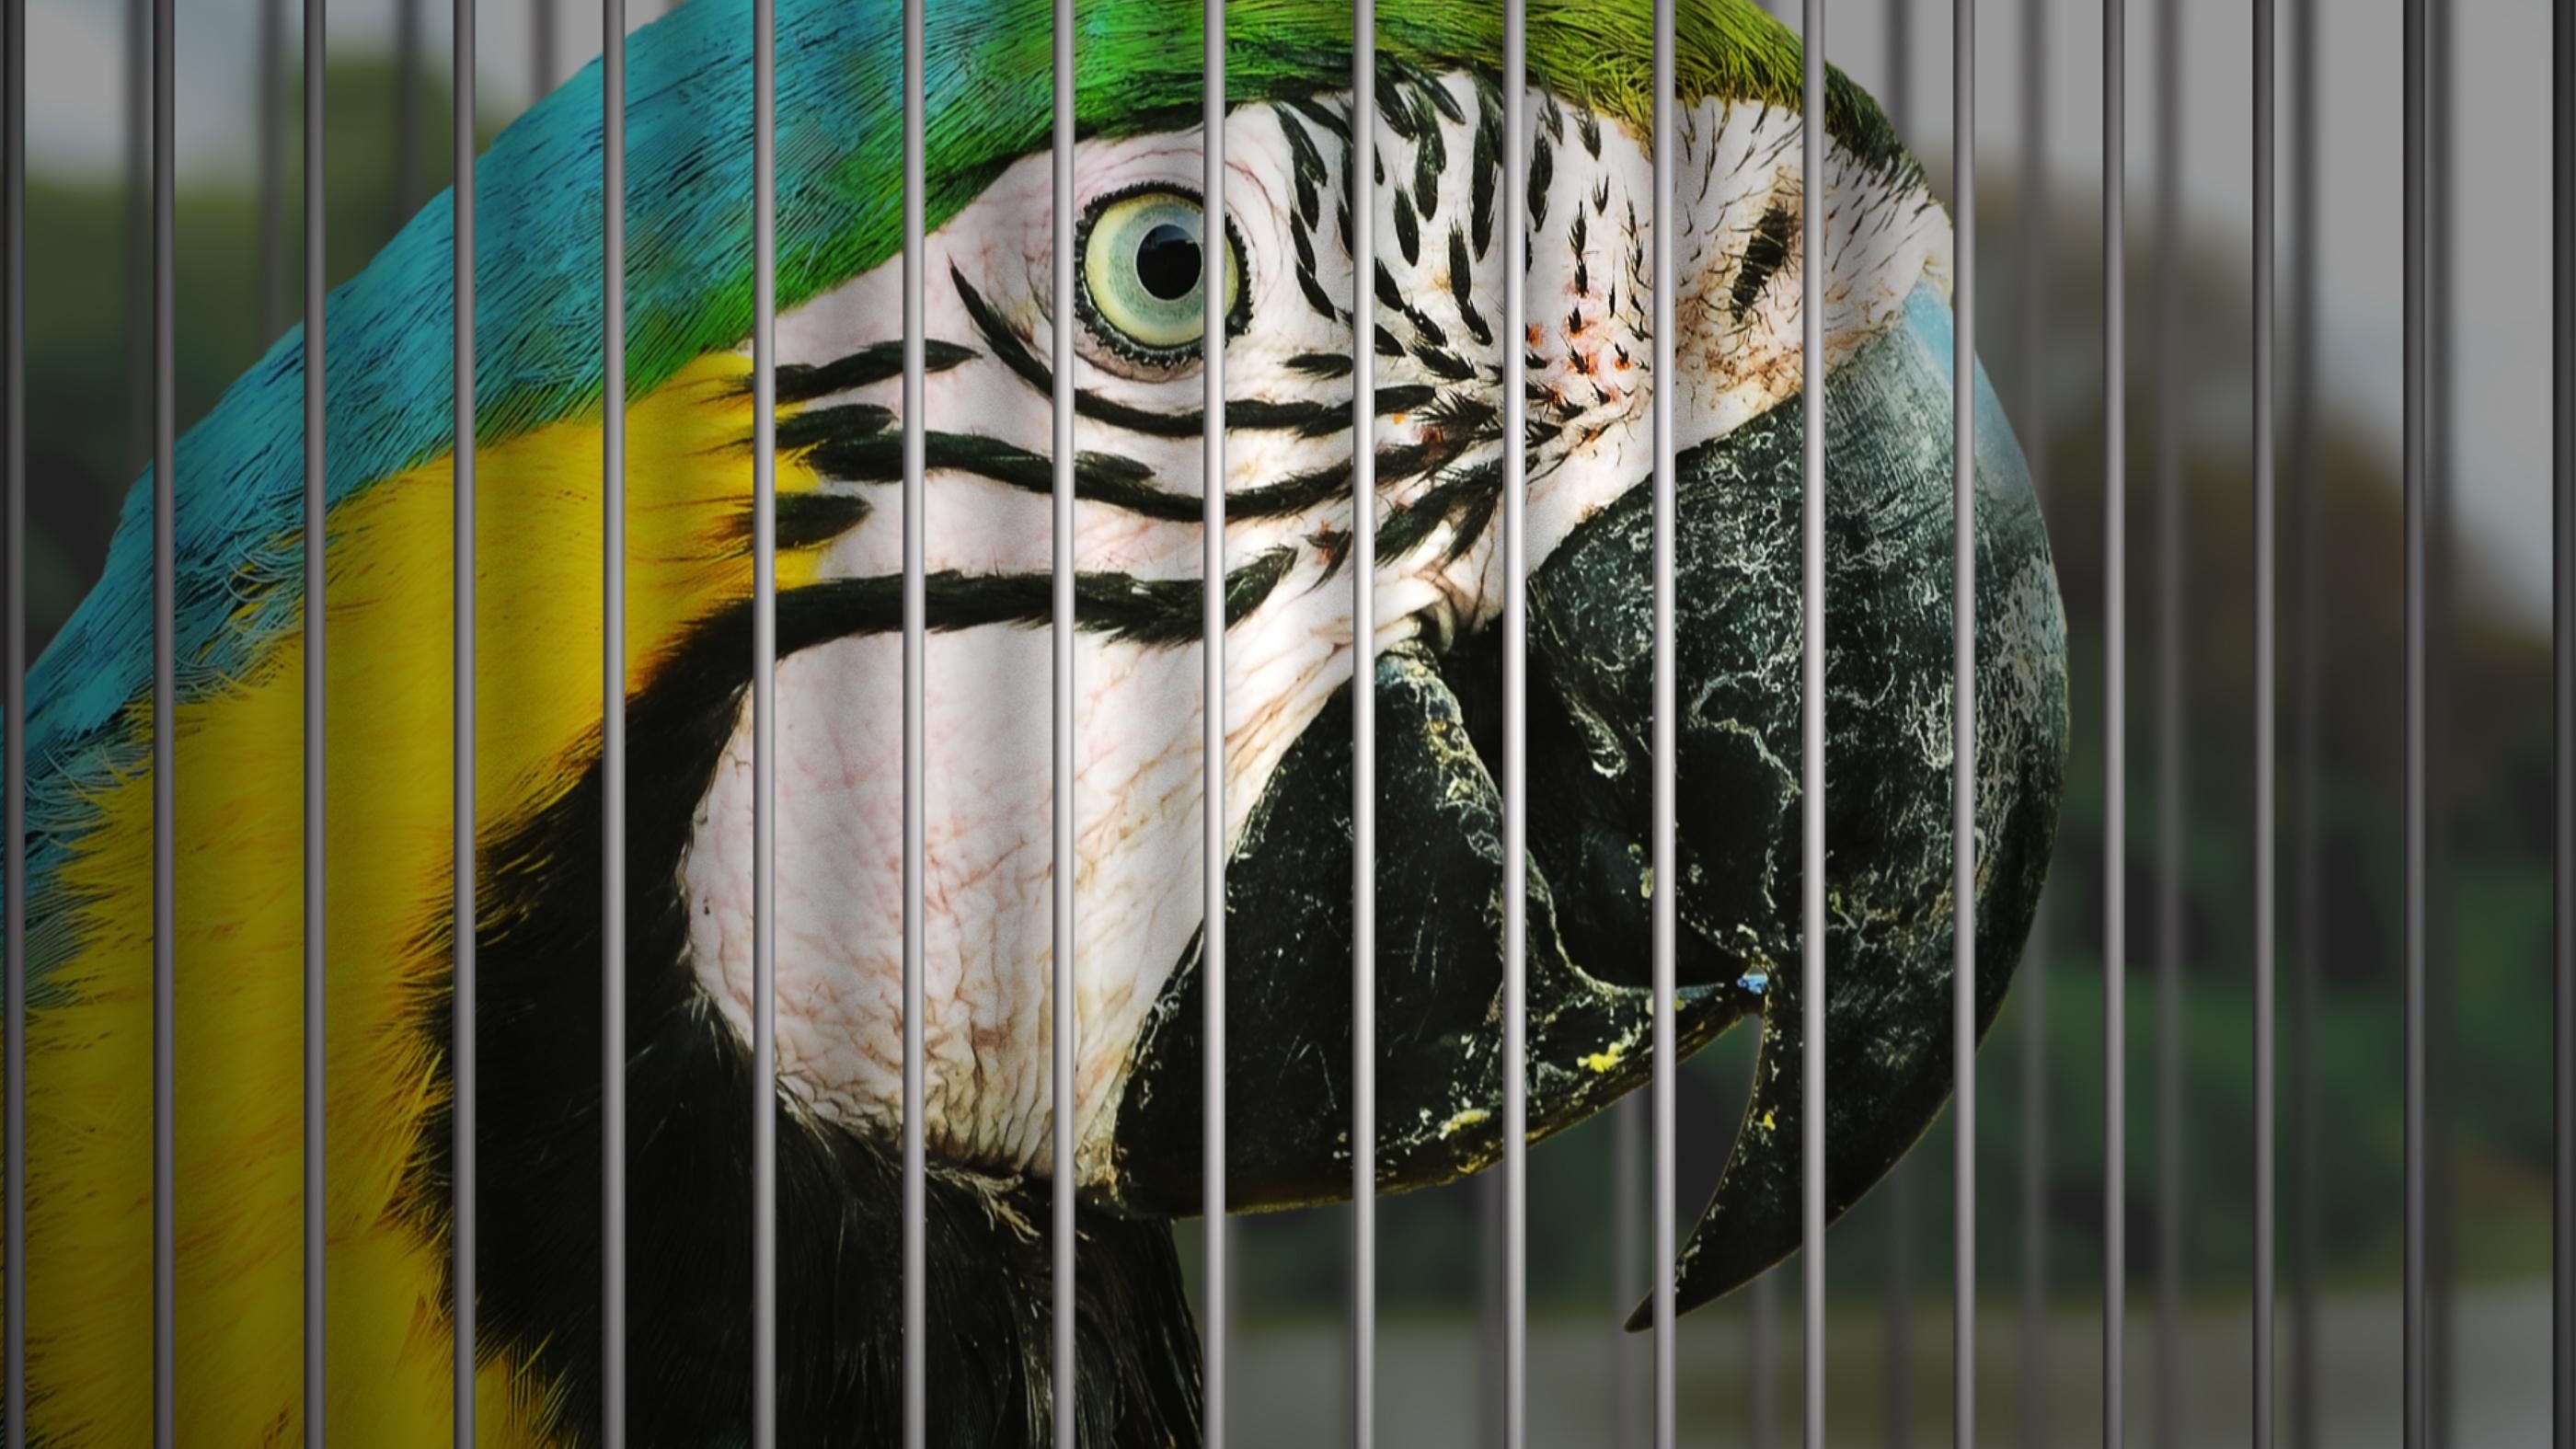 A colorful parrot behind bars